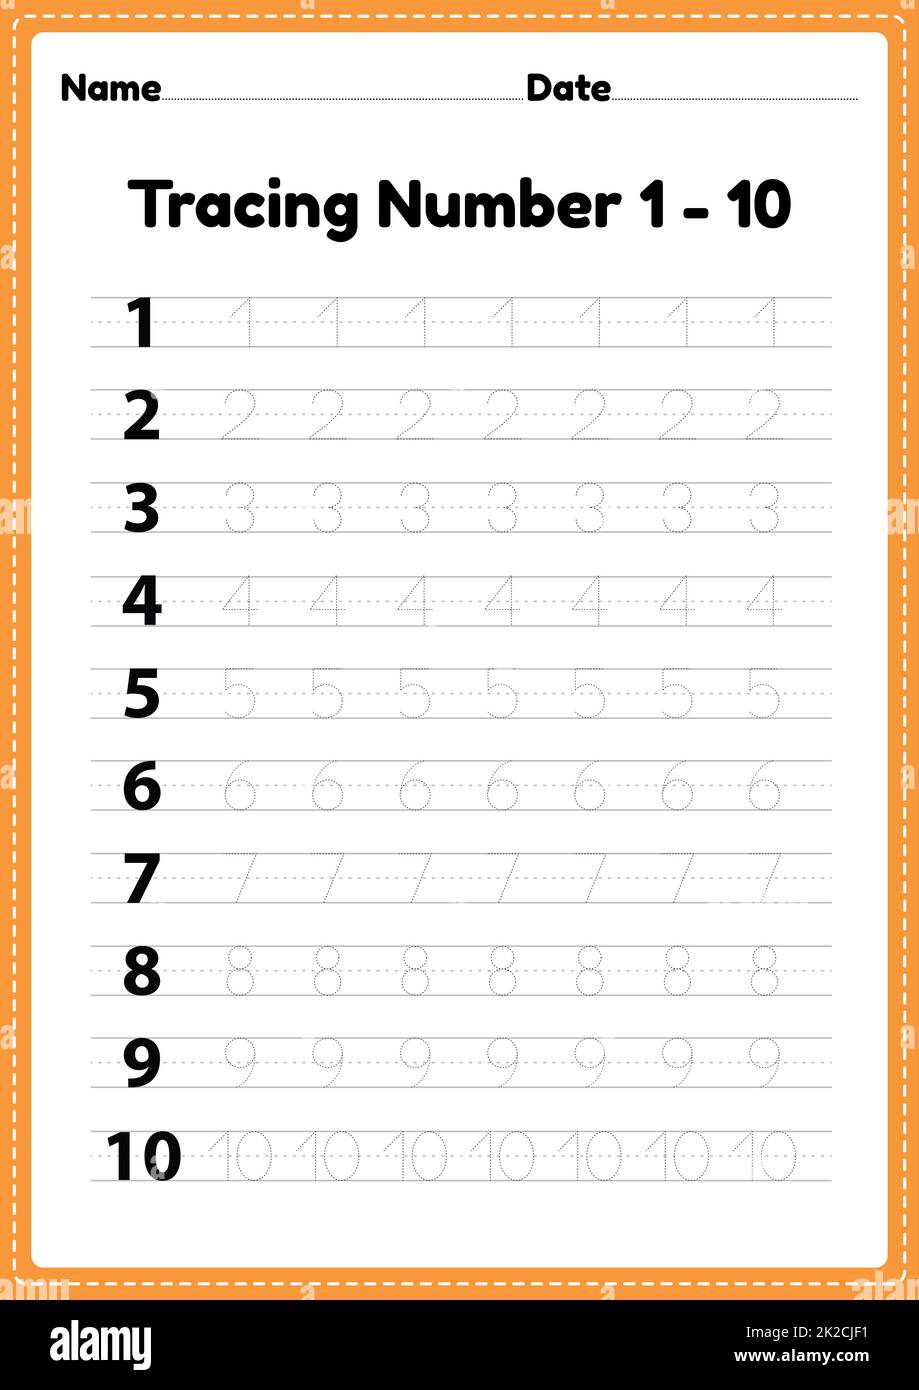 Tracing number 1-10 worksheet for kindergarten and preschool kids for educational handwriting practice in a printable page. Stock Photo